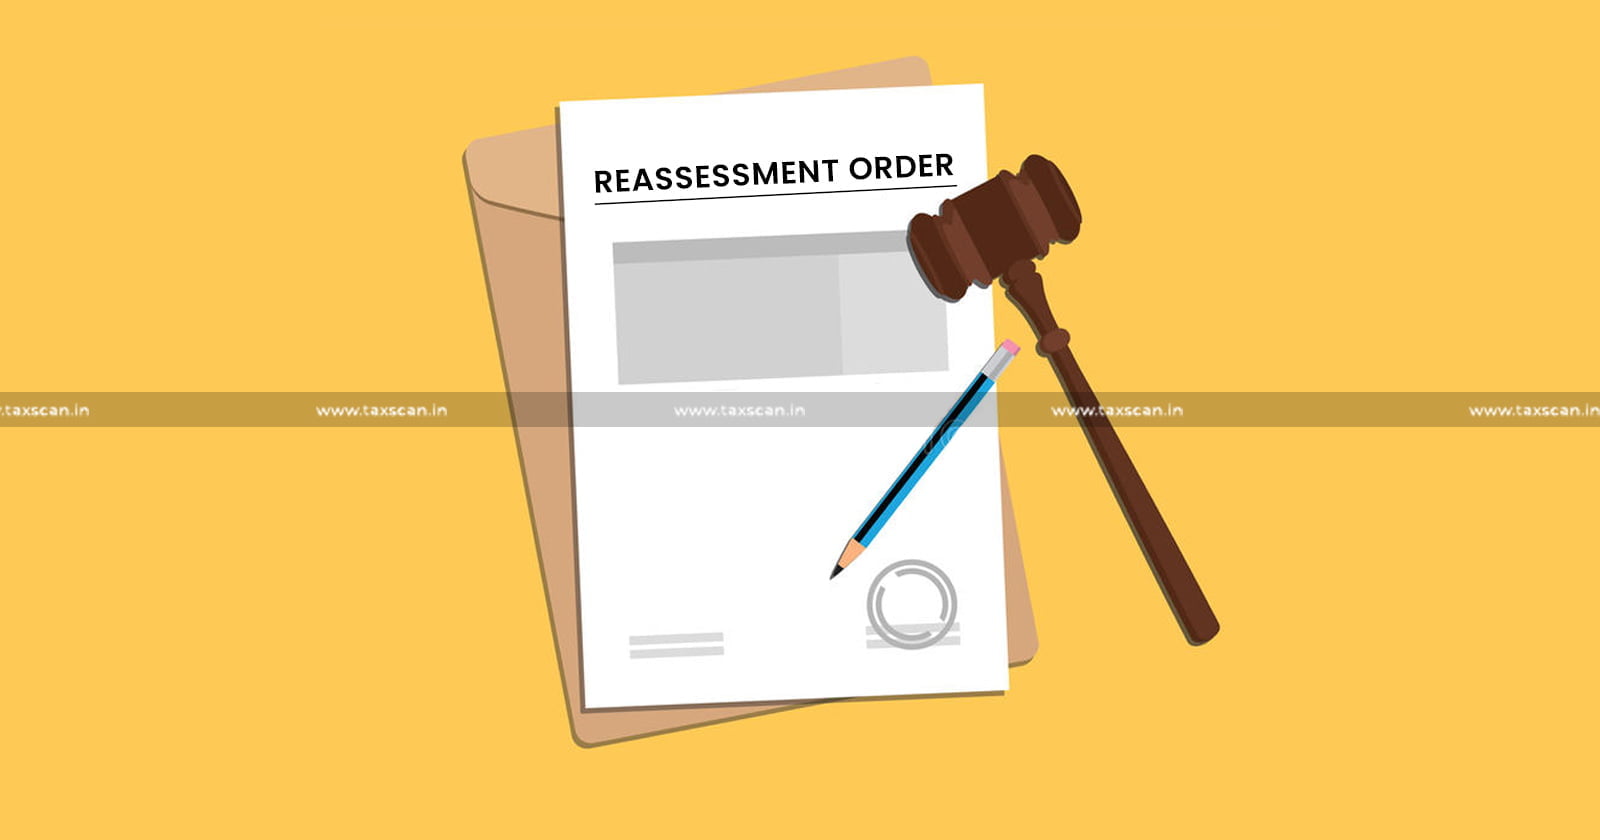 Reopening - Assessment - Illegal - Income - Believe - not Assessed - ITAT - quashes - Re-Assessment Order - taxscan